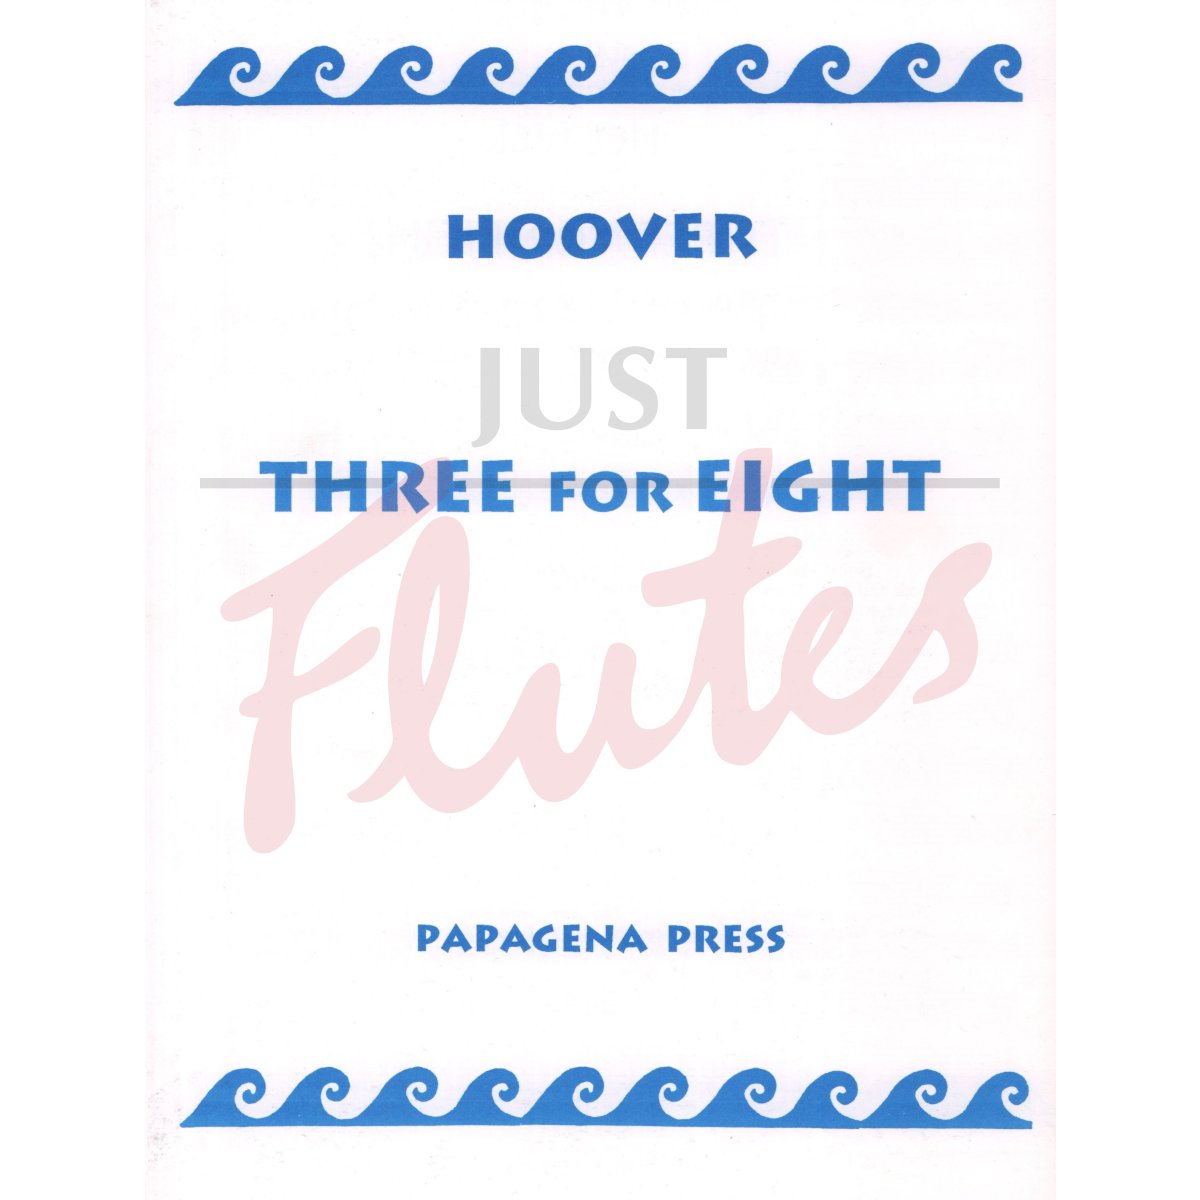 Three for Eight [Flutes]